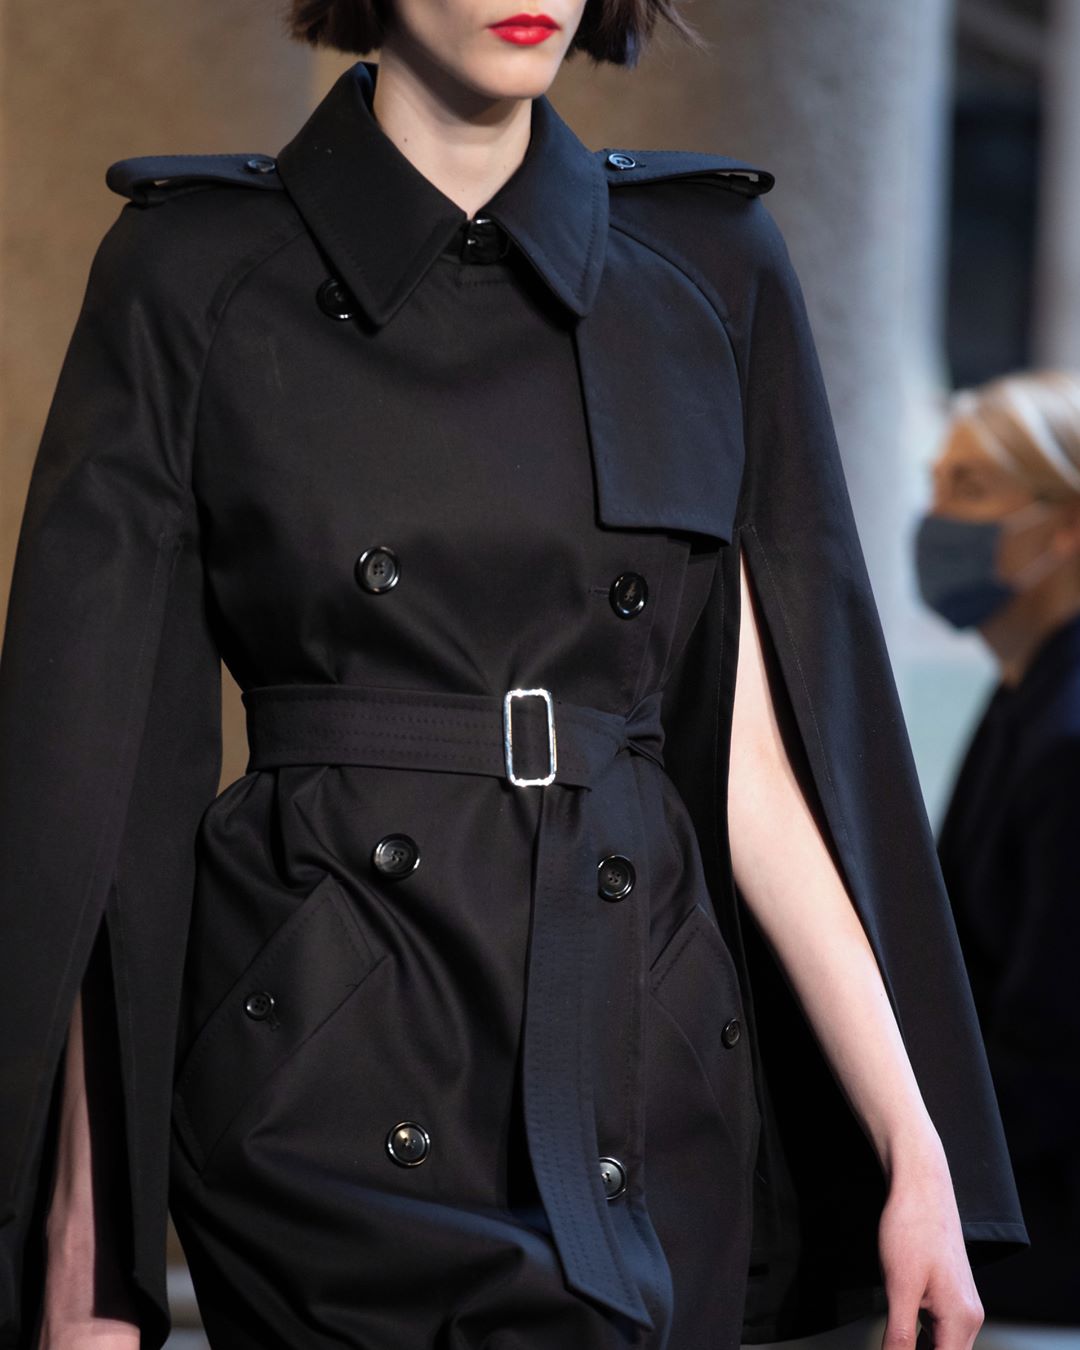 Max Mara - Embrace the revolutionary spirit of the #MaxMaraSS21 runway show with the perfectly detailed trenchcoat,, a masterfully tailored suit, the capacious bag worn with the little accessories. #M...